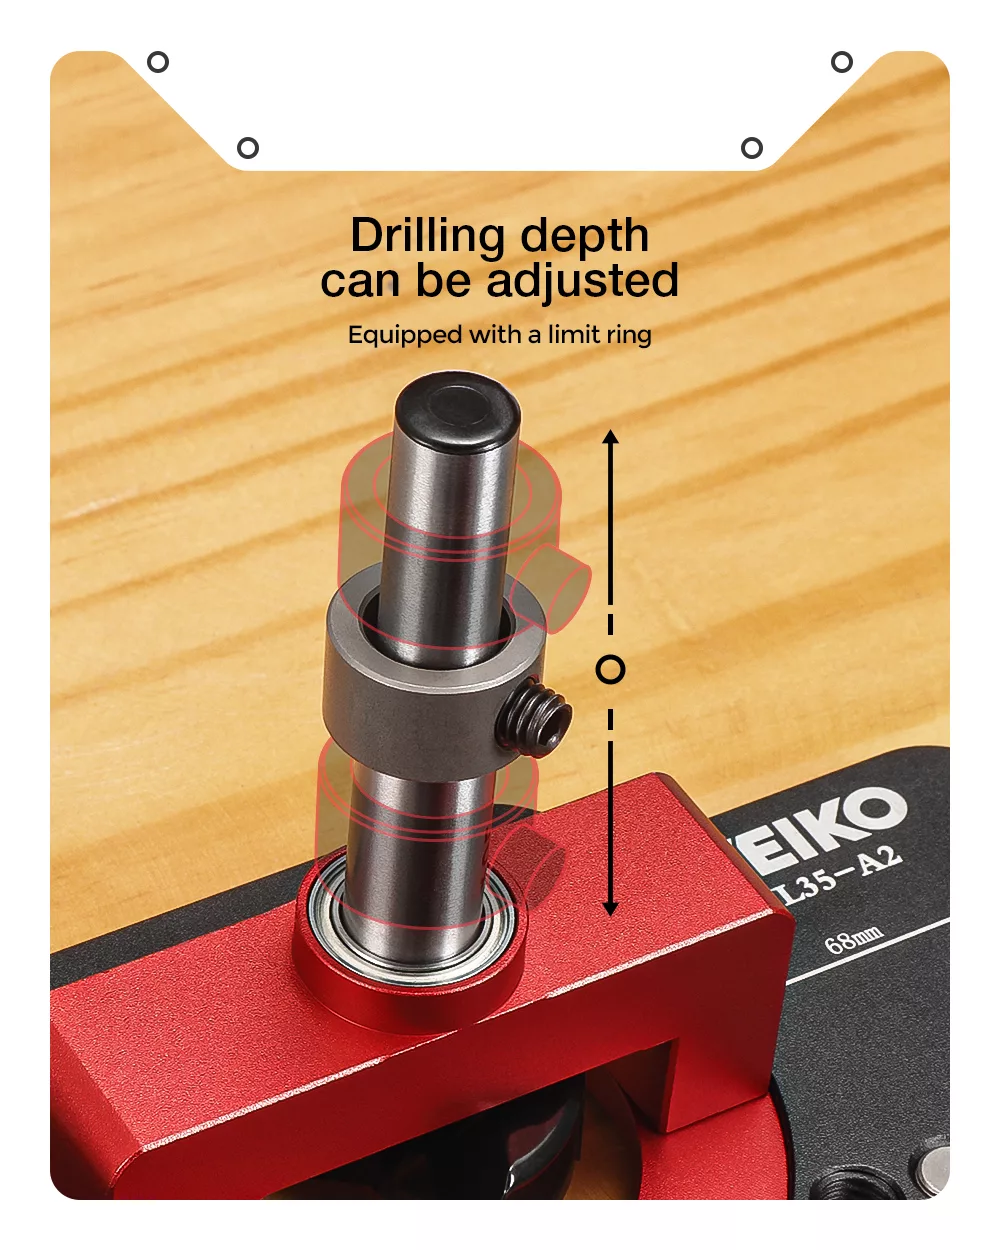 Drilling depth can be adjusted, equipped with a limit ring